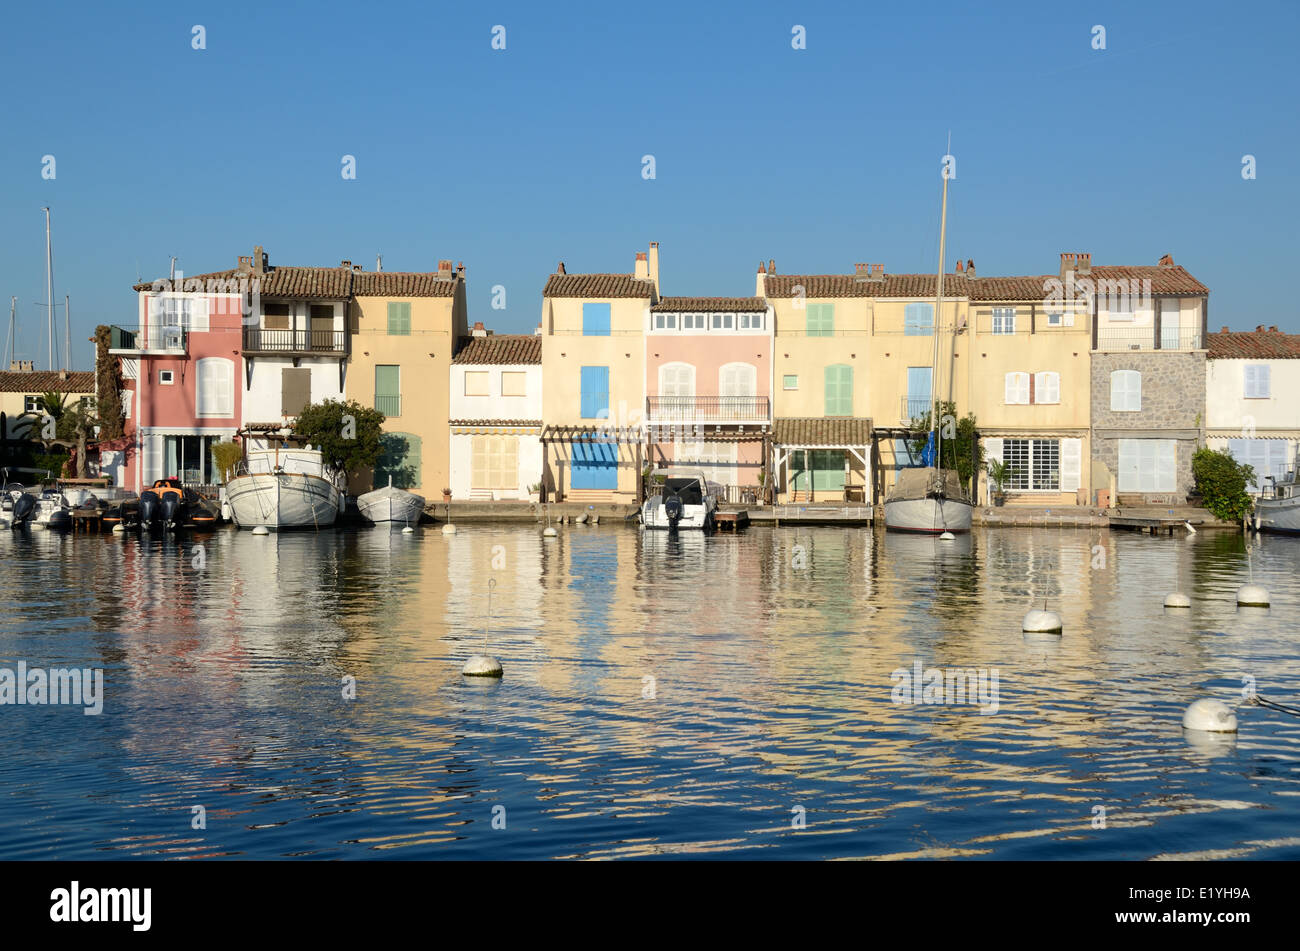 Waterfront or Waterside Houses in the Marina or Harbour of Port Grimaud Resort Town Var Côte d'Azur or French Riviera Southern France Stock Photo